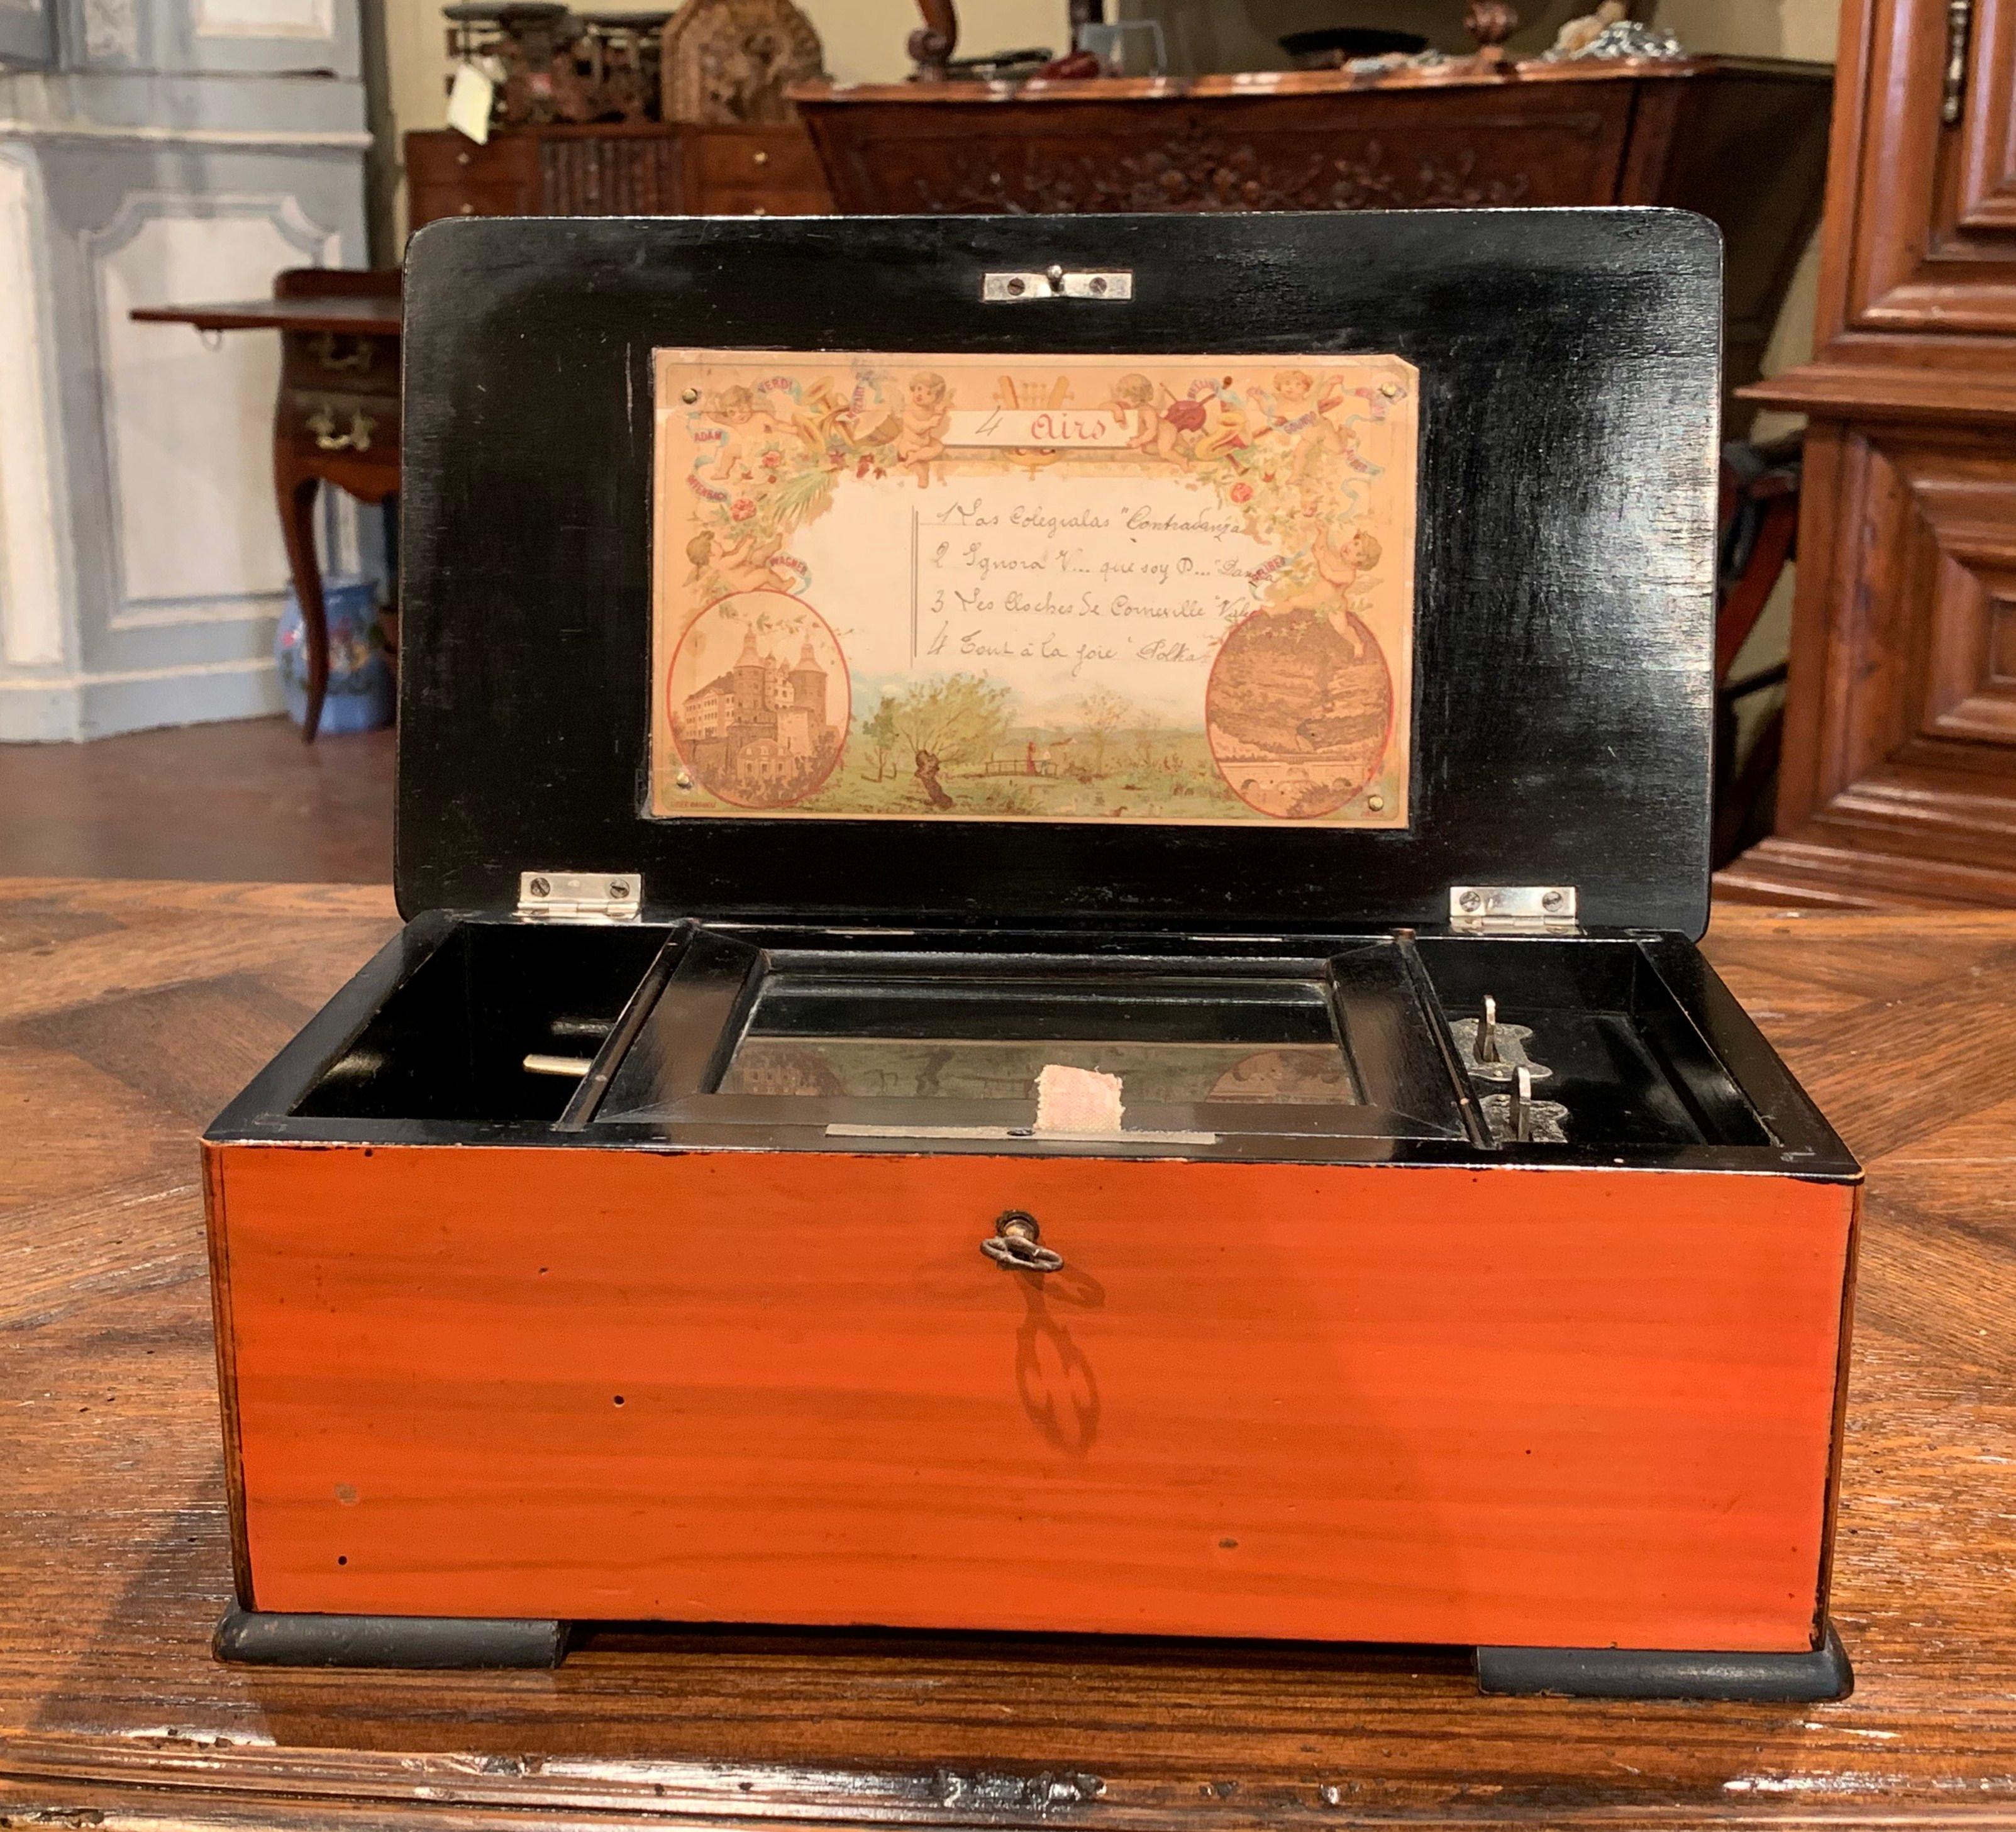 Listen to soft, cheerful music in your living room with this traditional, antique music box. Crafted in Paris, France circa 1900, the tulip wood case with inlaid brass decor, has black painted edges and a hand painted floral motif in the center. The